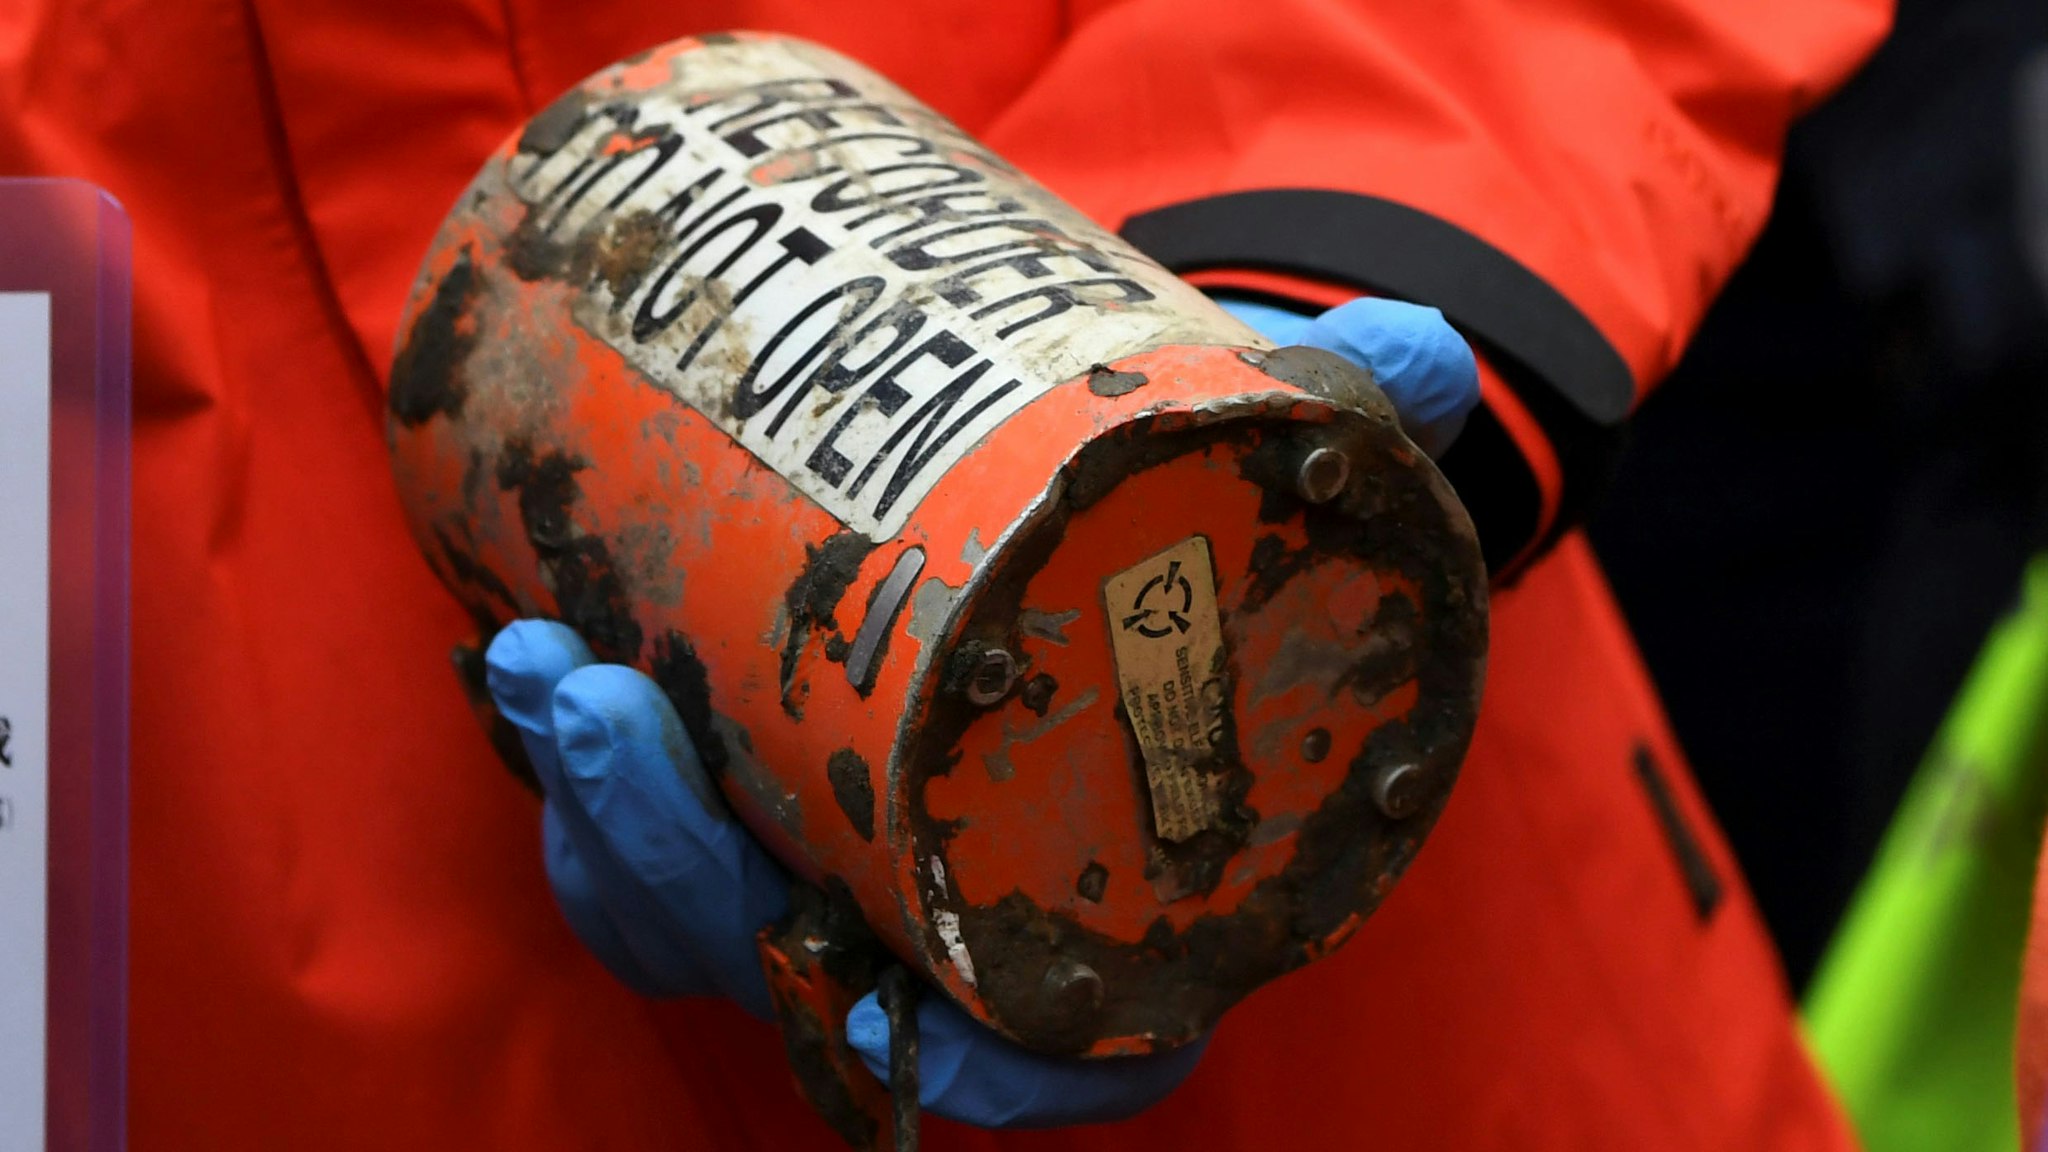 Photo taken on March 27, 2022 shows the second black box recovered at the crash site of the China Eastern Airlines' plane in Tengxian County, south China's Guangxi Zhuang Autonomous Region. The second black box of the plane that crashed Monday in Guangxi Zhuang Autonomous Region was recovered Sunday, according to the national emergency response headquarters for the accident.